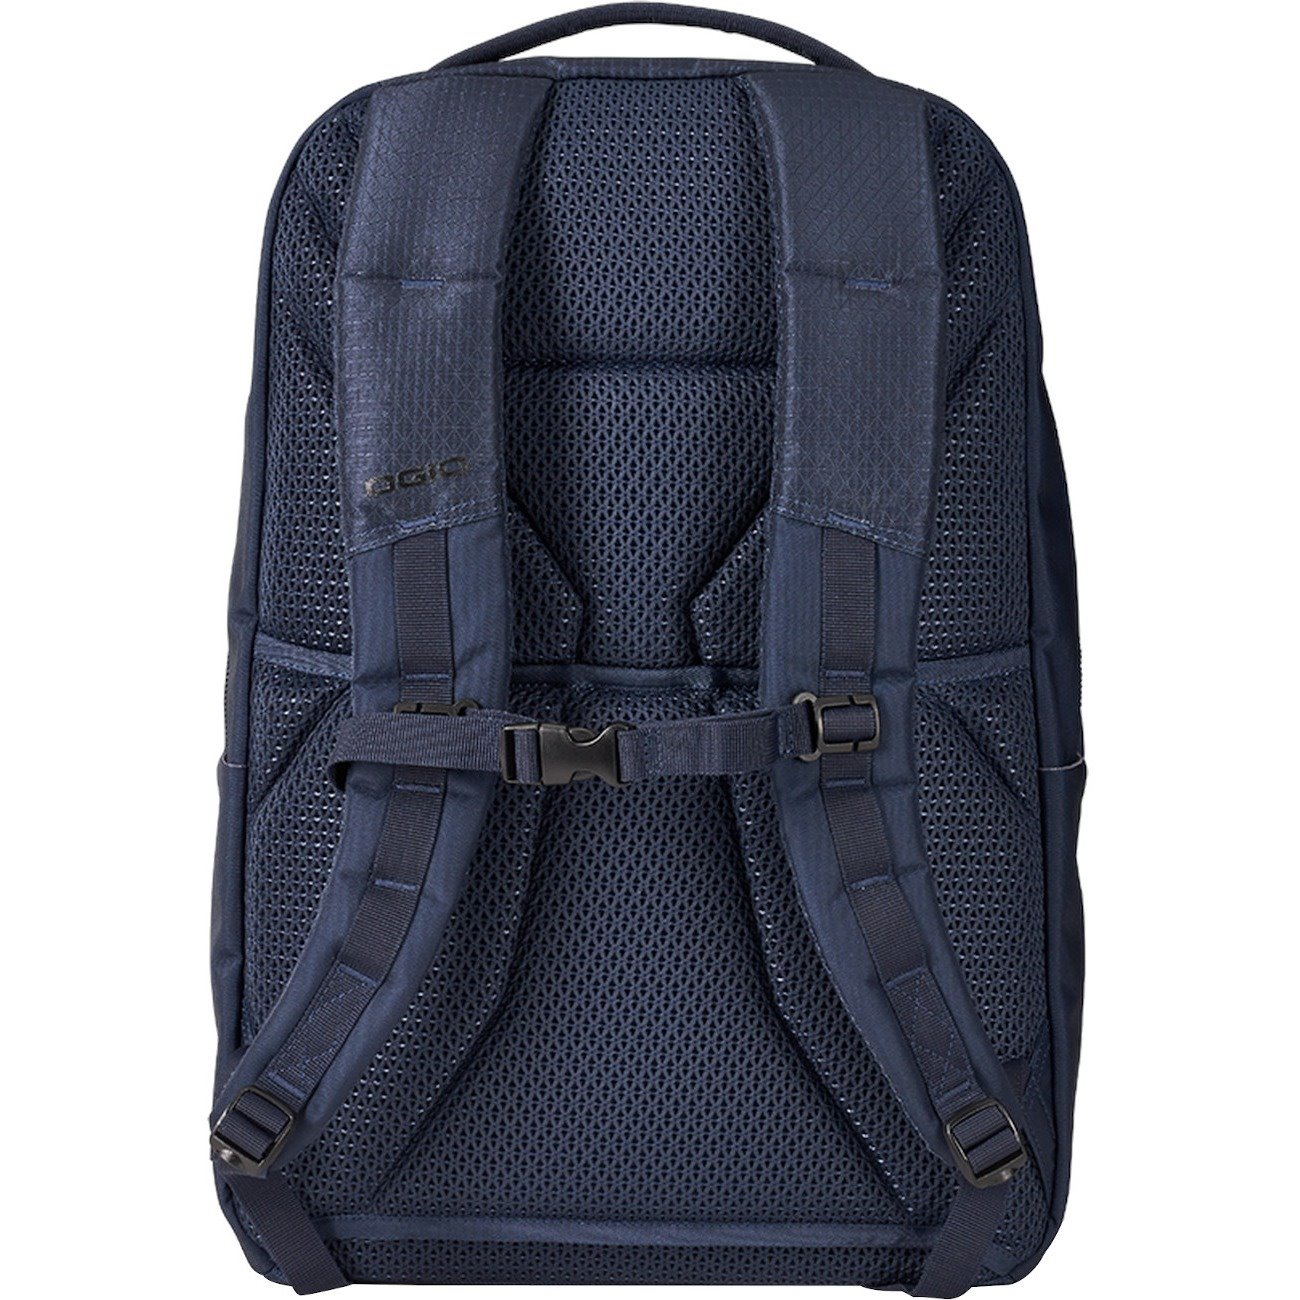 Ogio Axle Pro Carrying Case (Backpack) for 17" Notebook, Tablet, Travel Essential - Navy